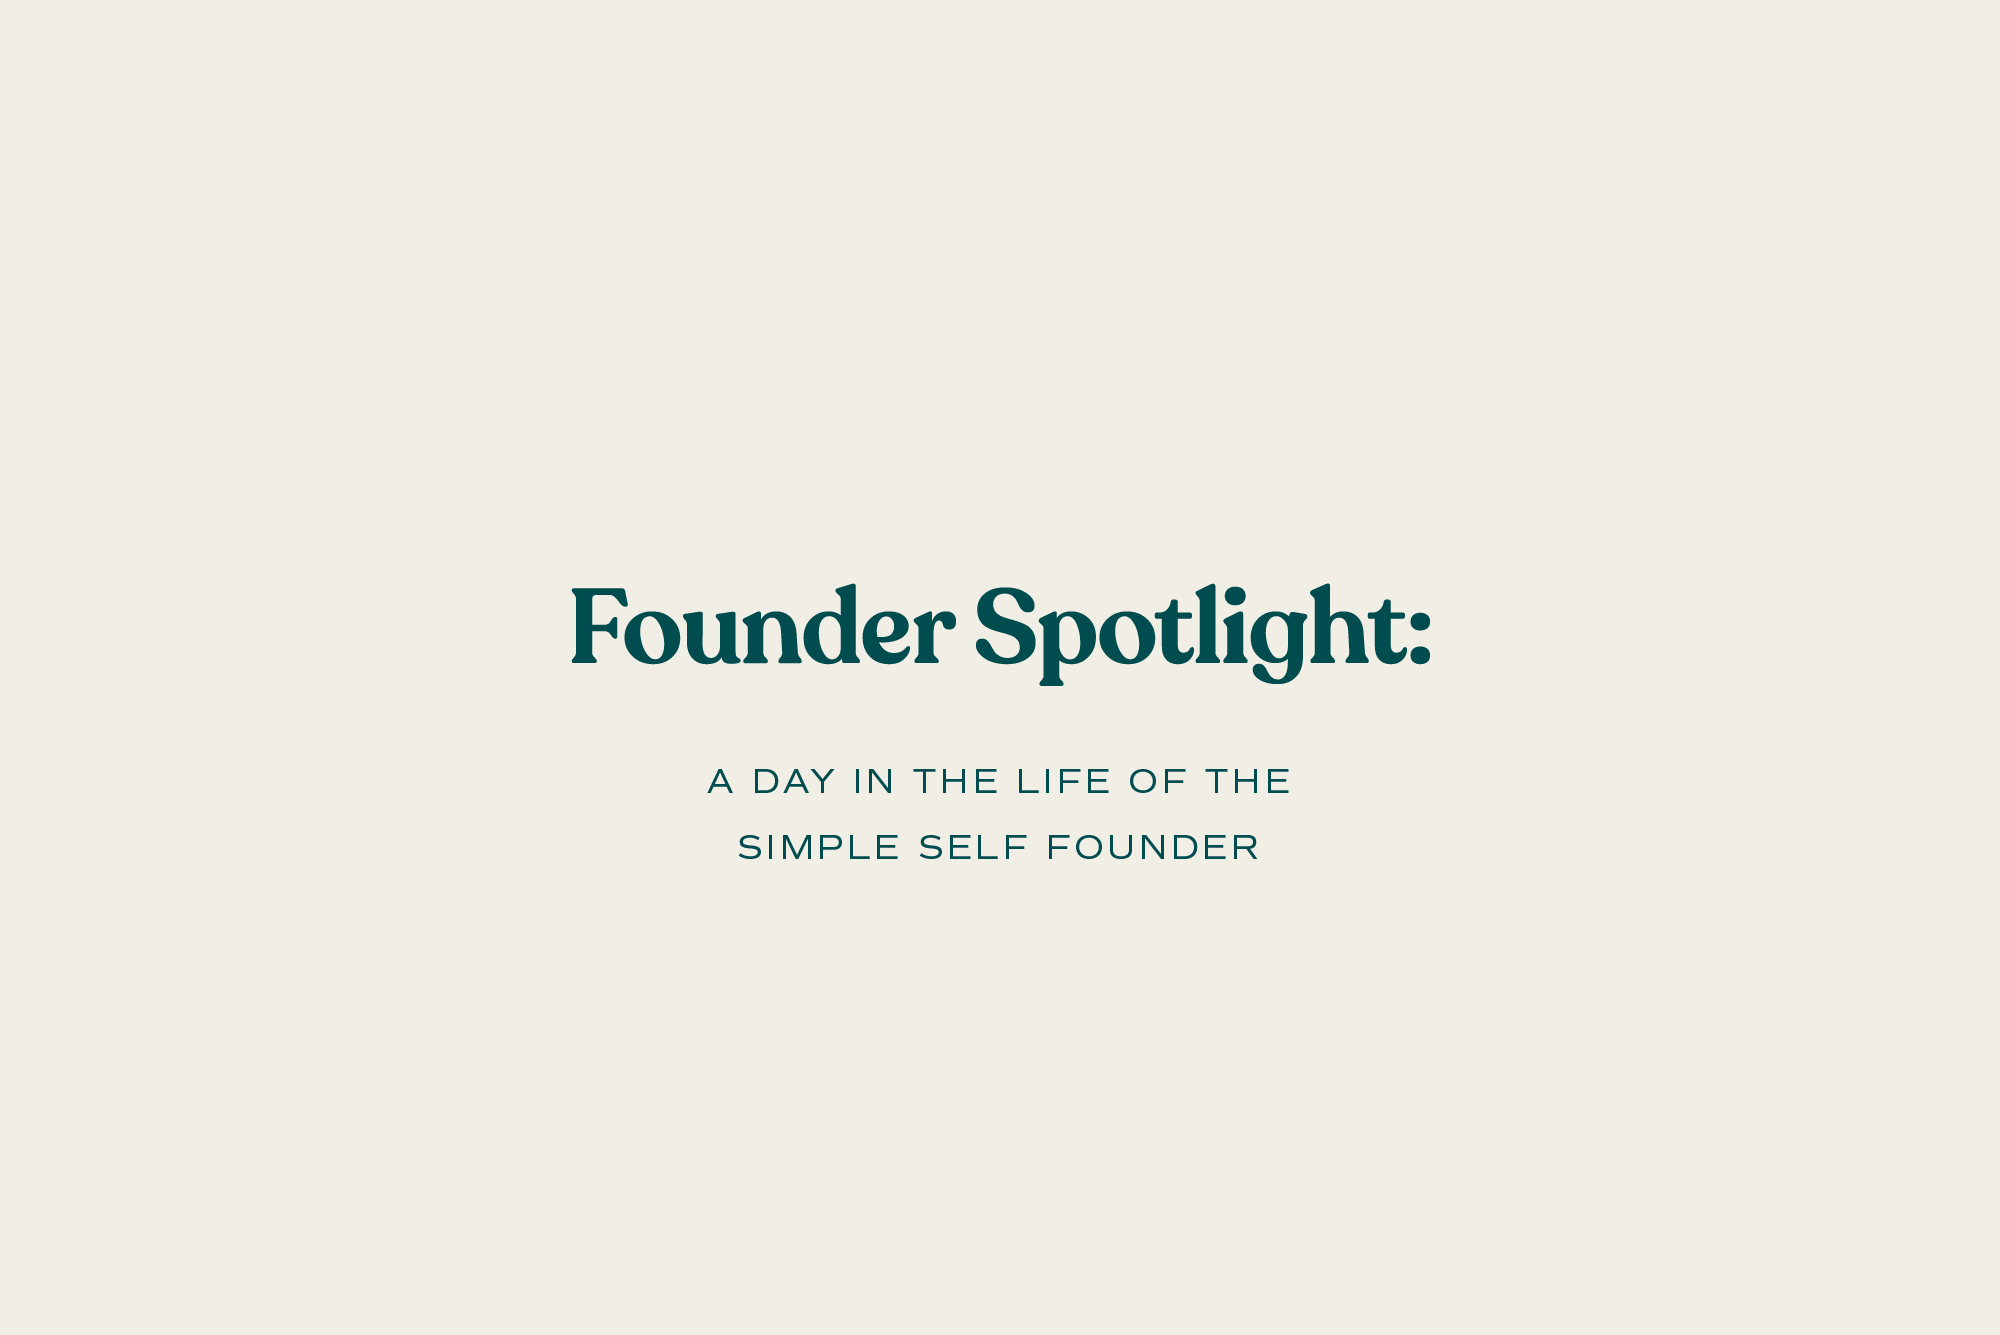 Founder Spotlight: A Day in the Life of the Simple Self Founder